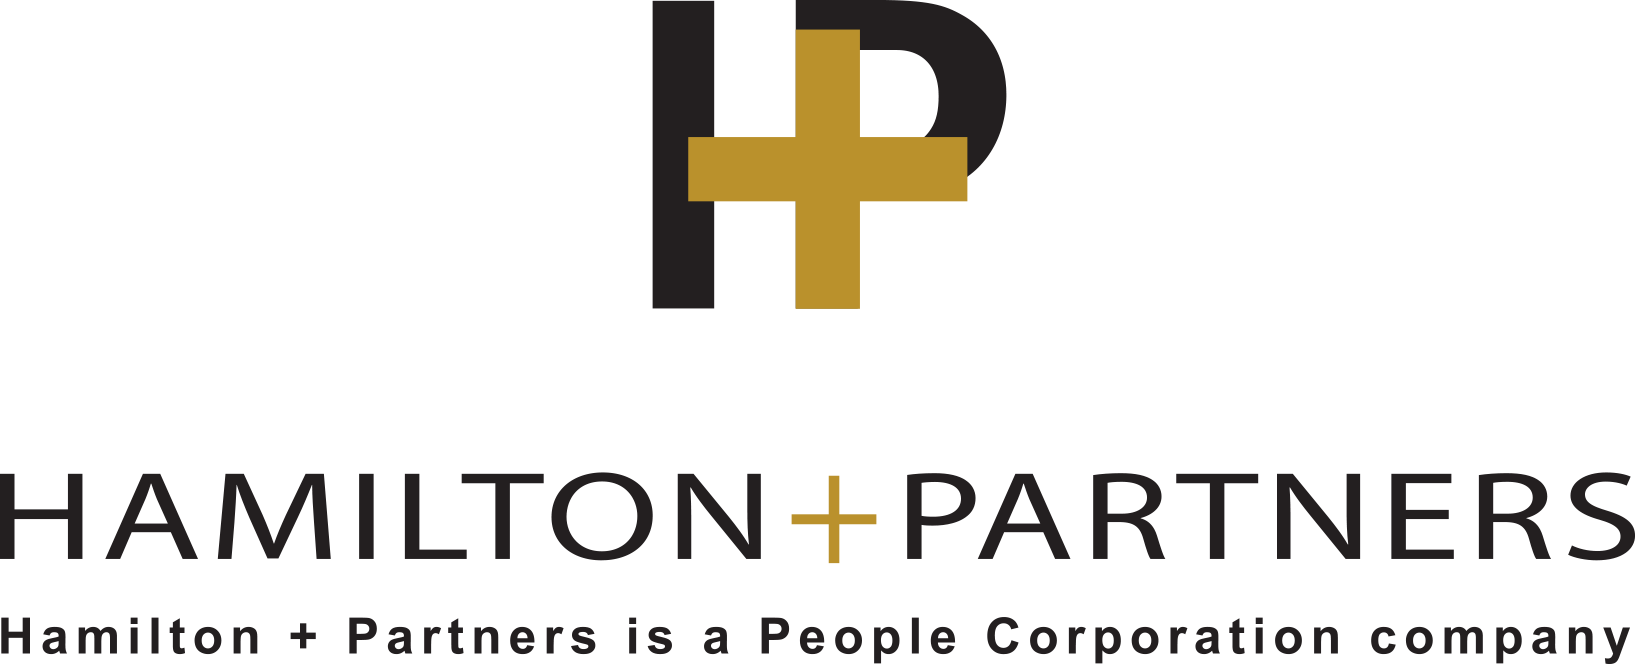 Hamilton and Partners, is a people corporation company homepage